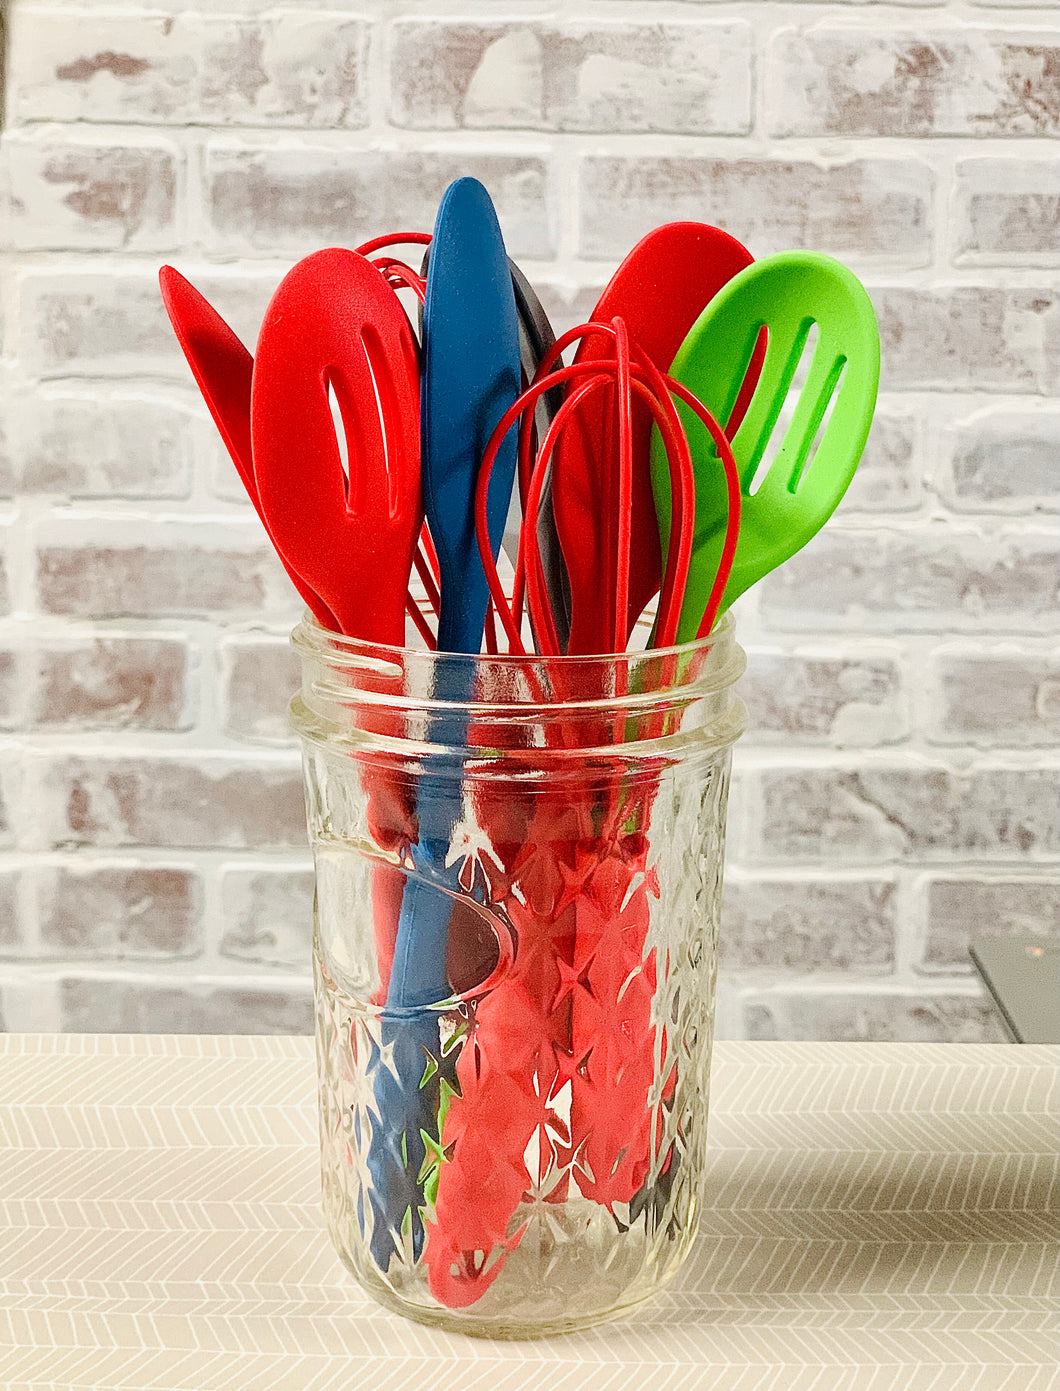 Silicon Cooking Utensils